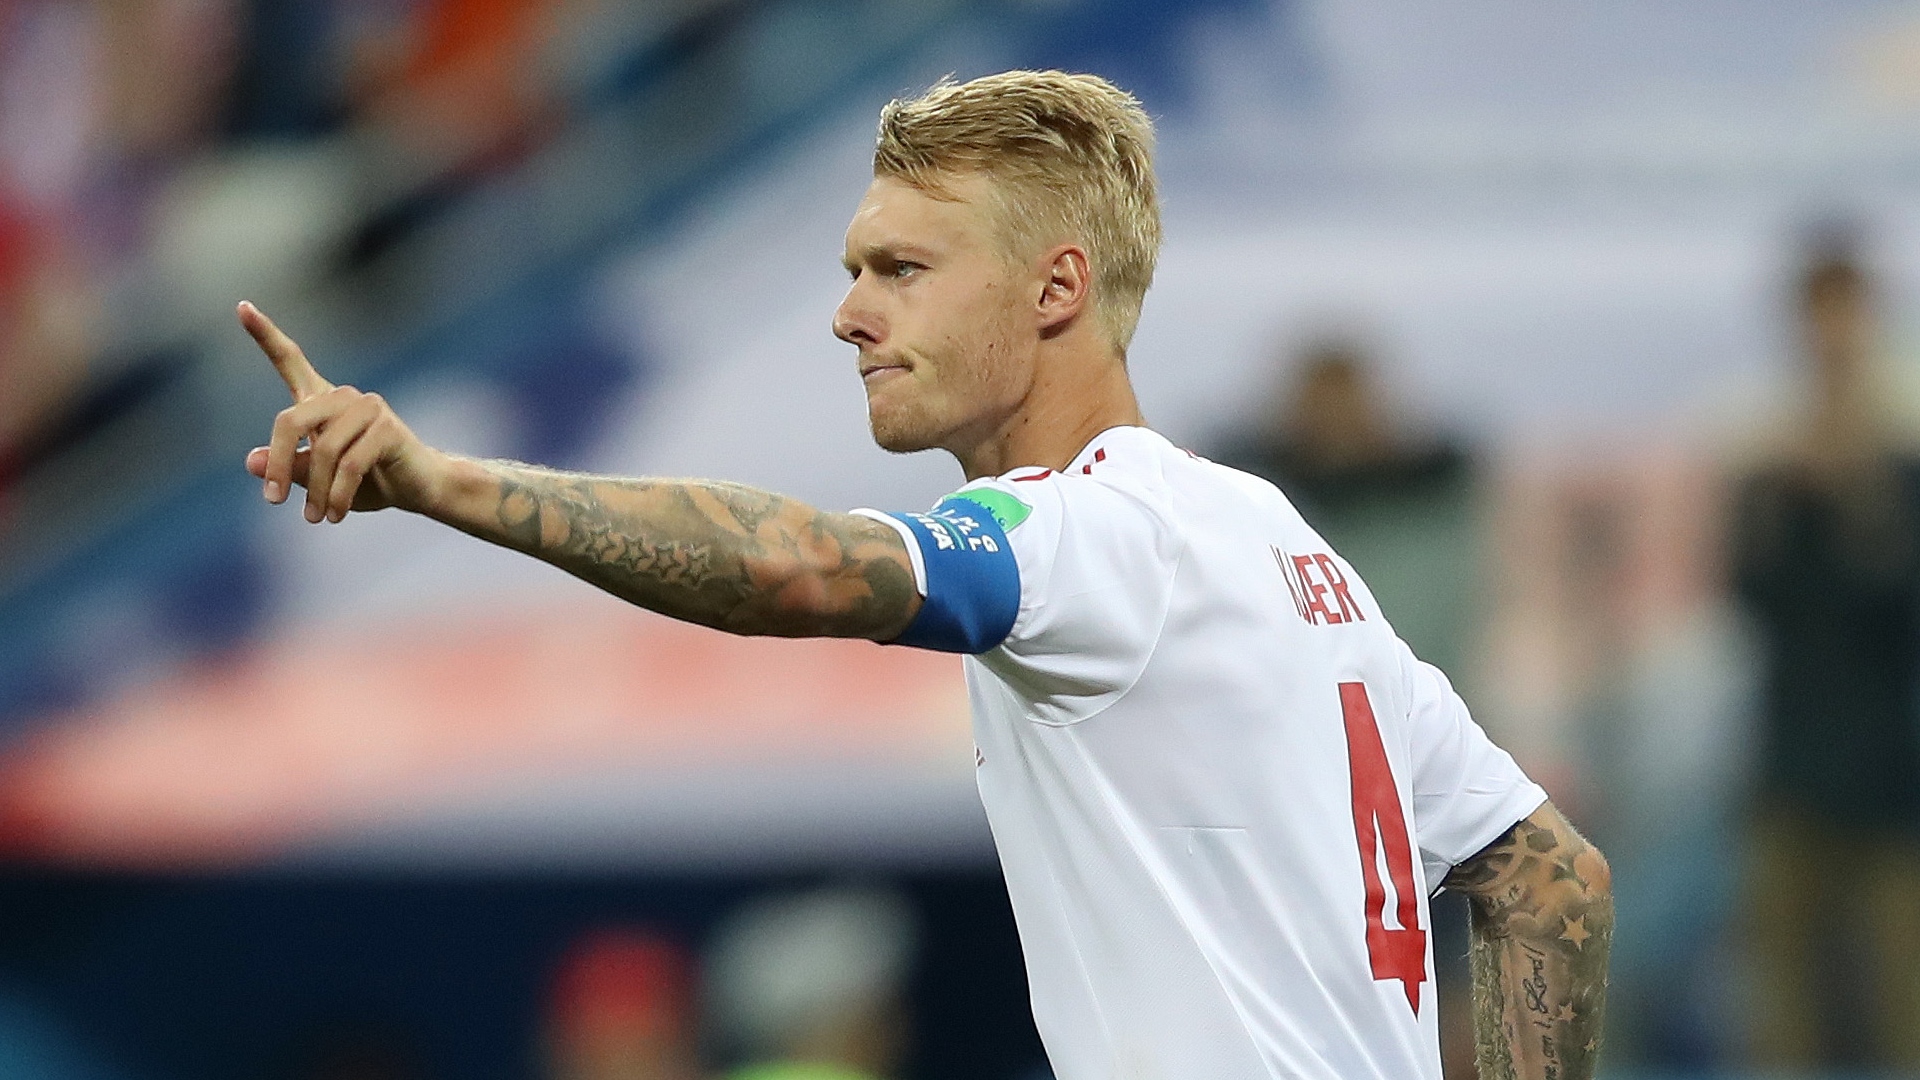 'Milan has always been special to me' – Kjaer feels privileged to make San Siro switch permanent